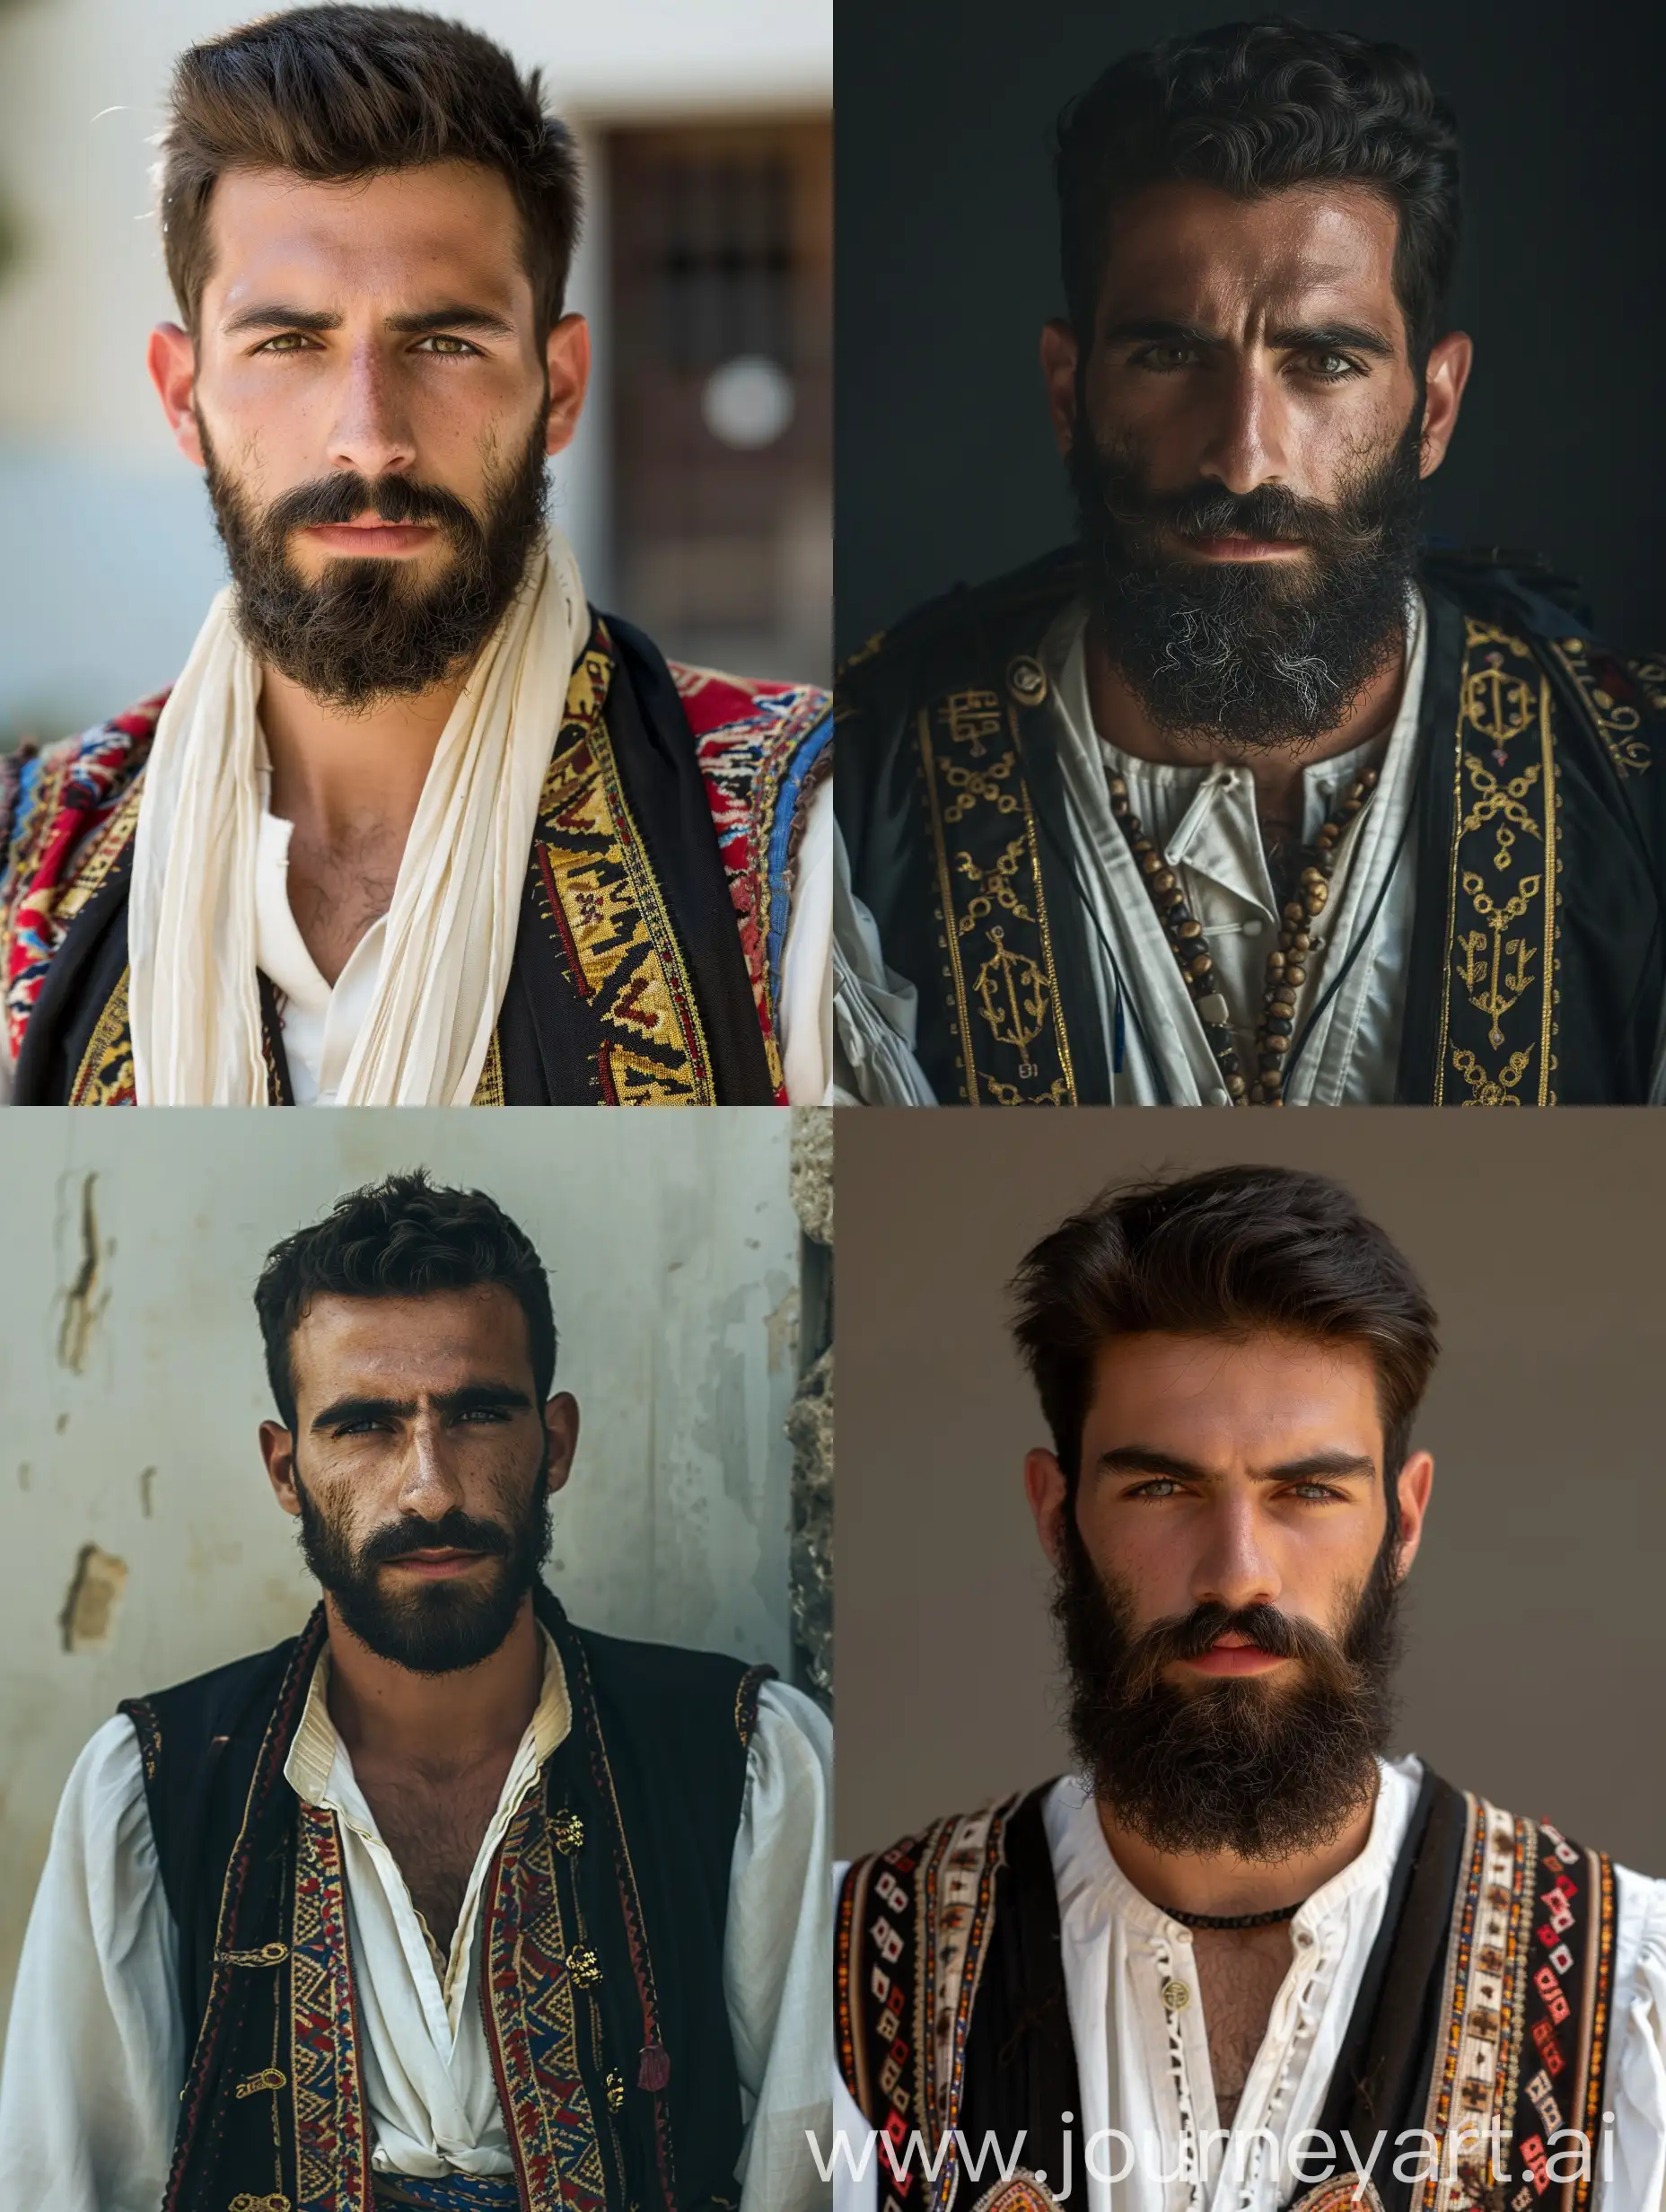 Handsome-Greek-Man-in-Traditional-Fustanella-Clothing-HighResolution-4K-Realistic-Image